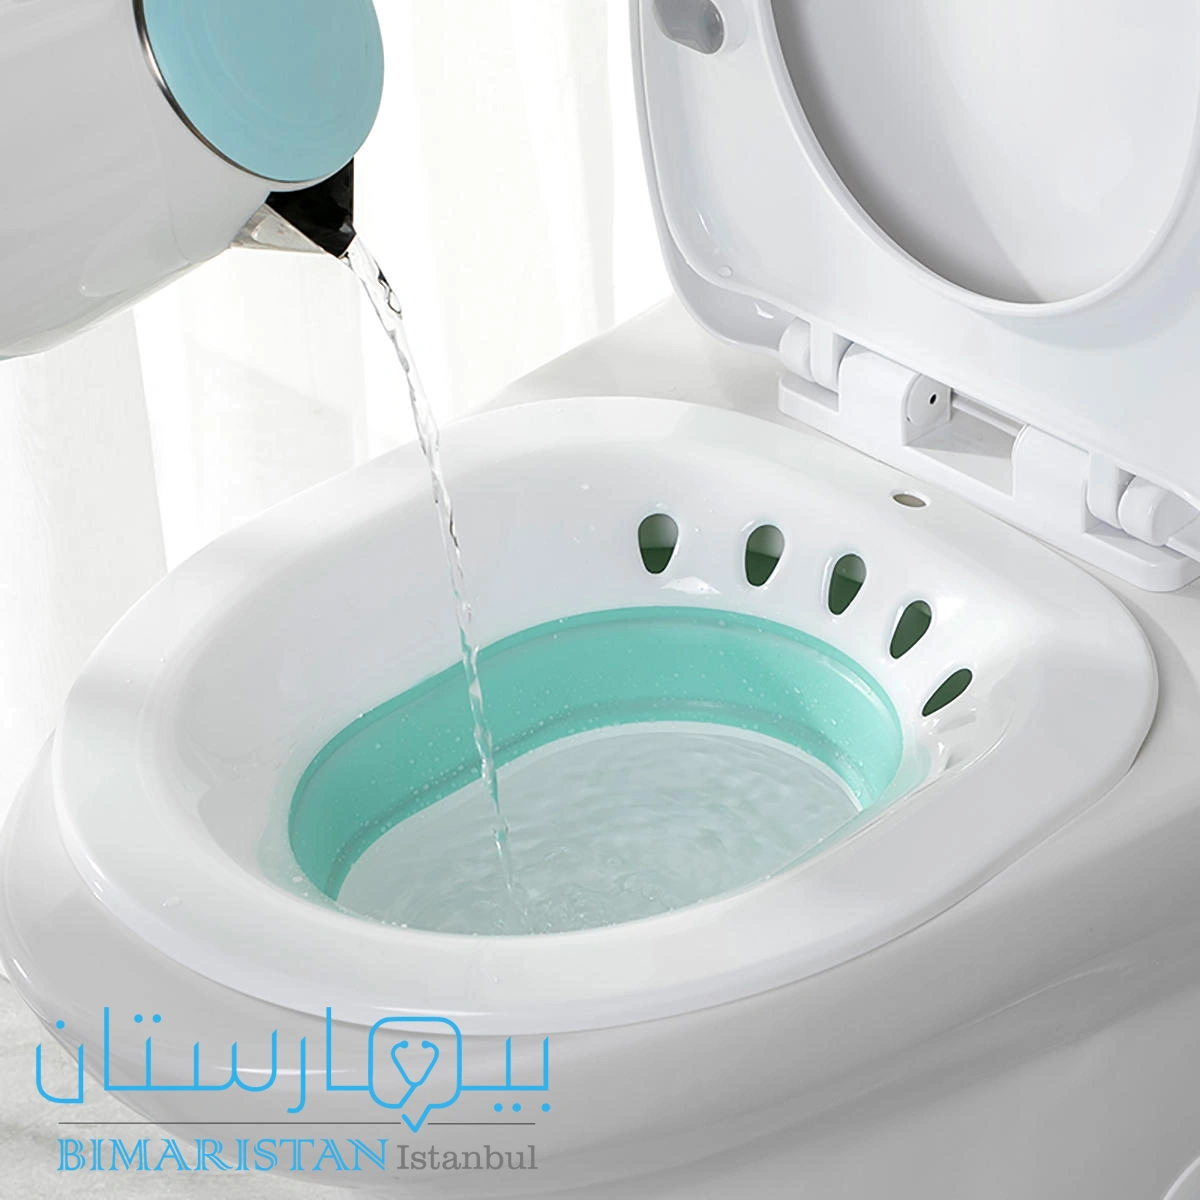 A sitz bath, which is used to treat hemorrhoids at home